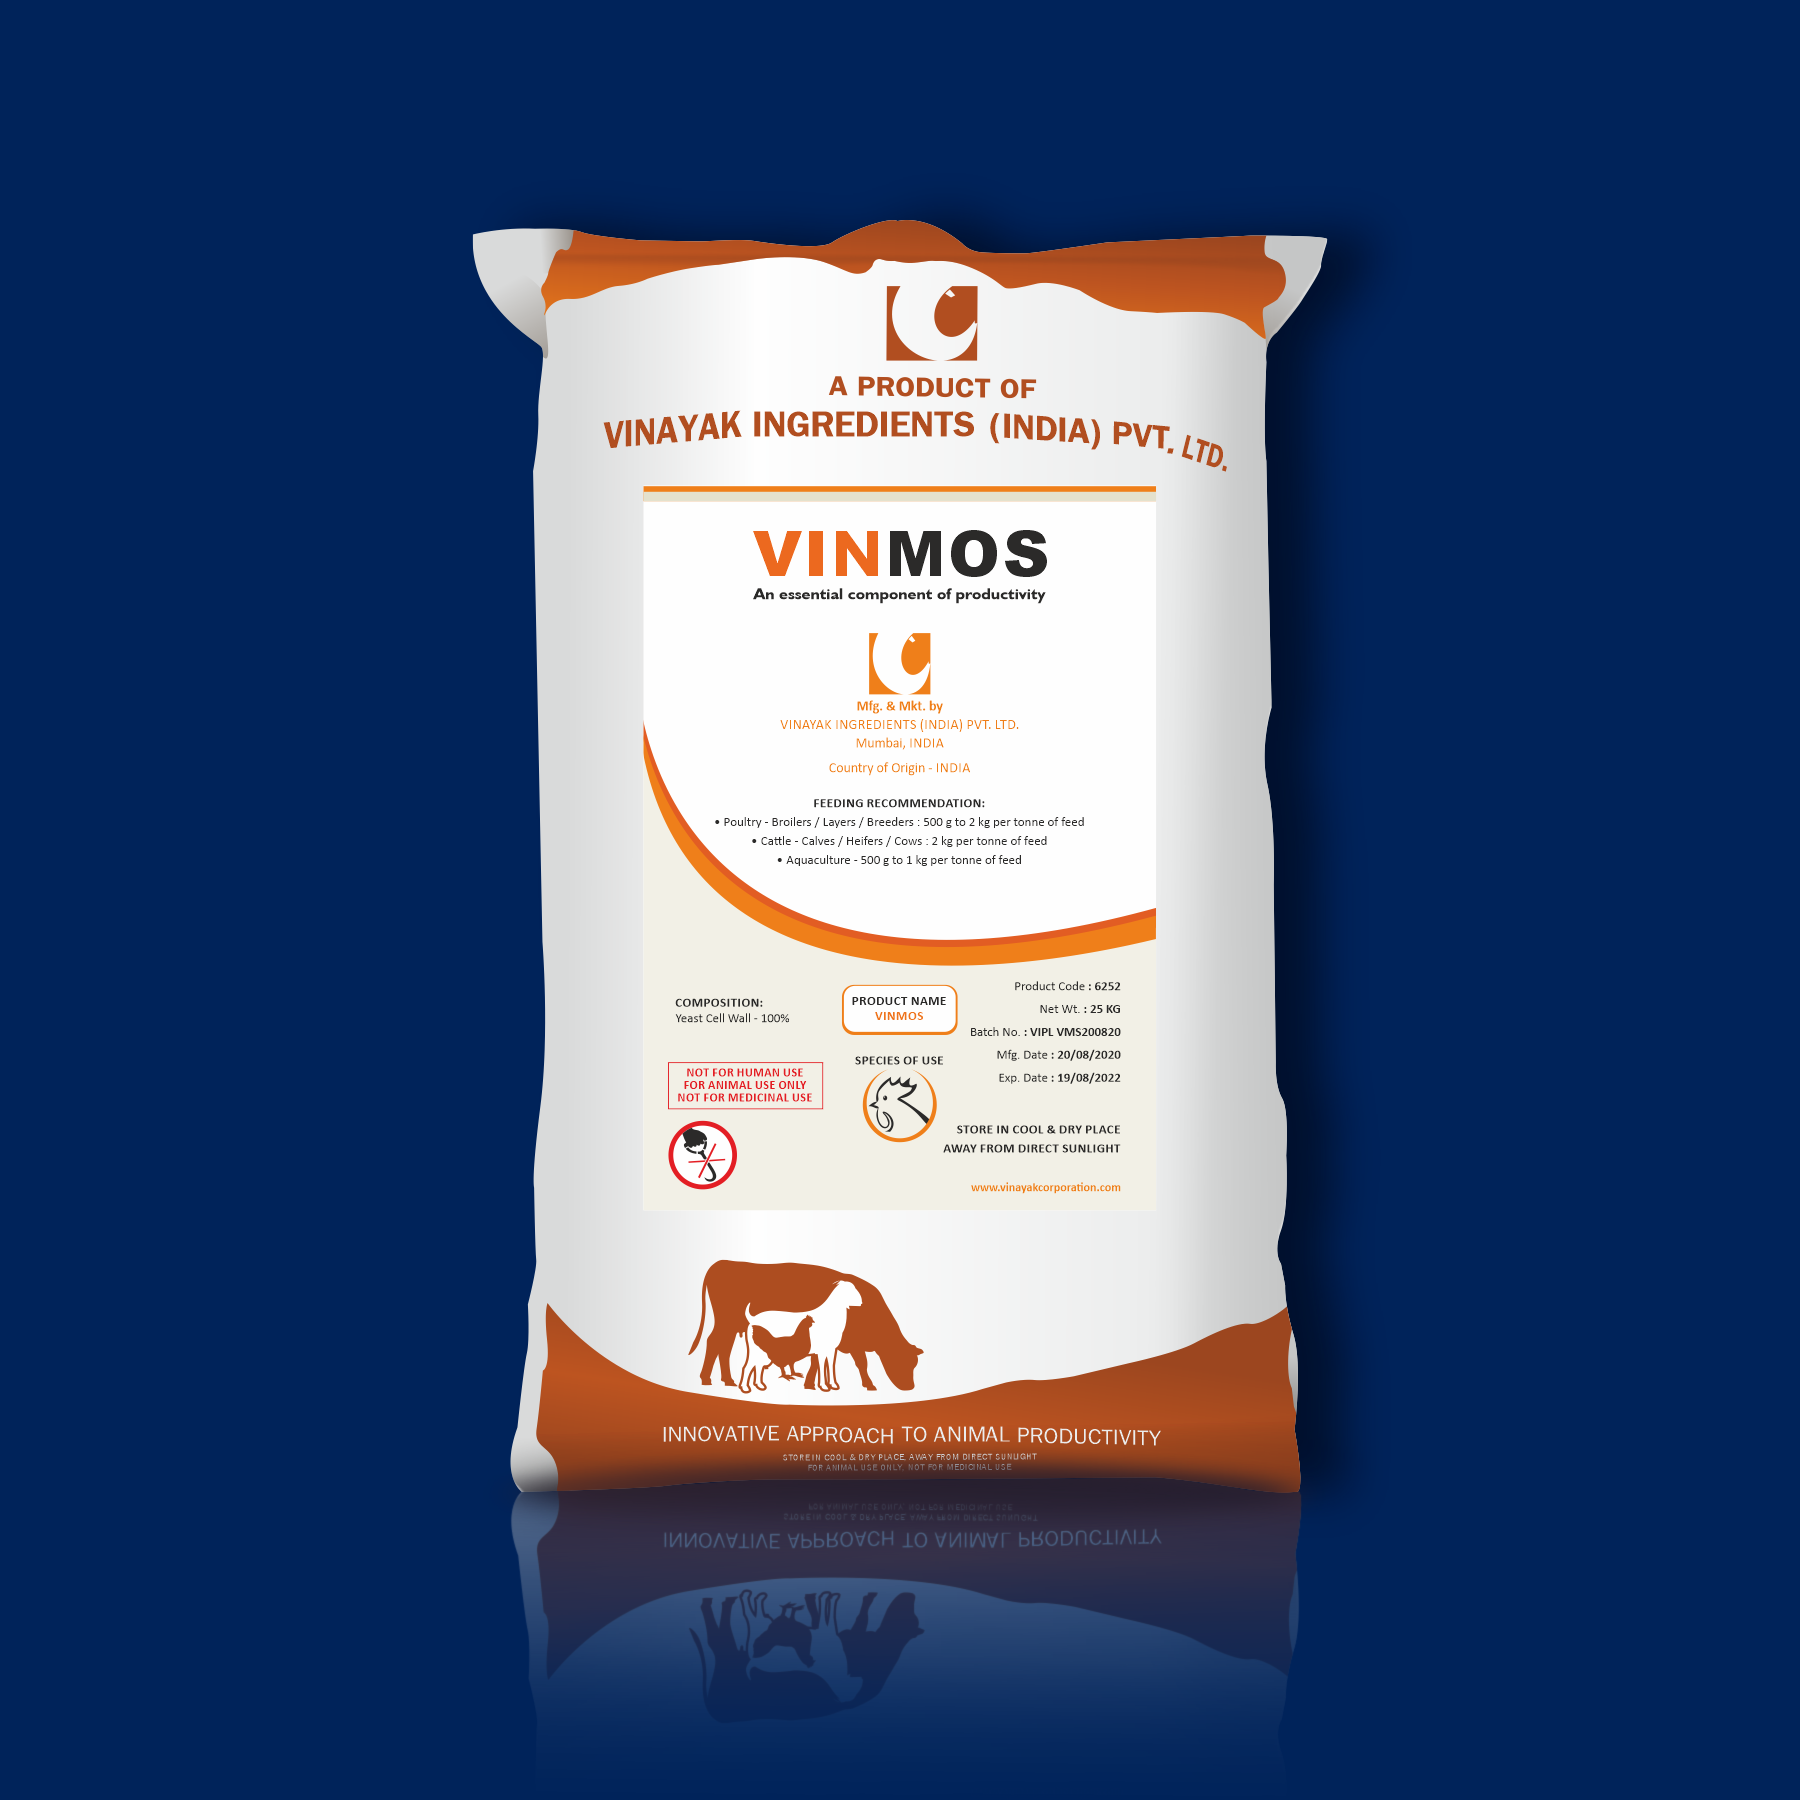 VINMOS - best gut health supplements - improve international morphology in poultry - Natural growth promoter in poultry